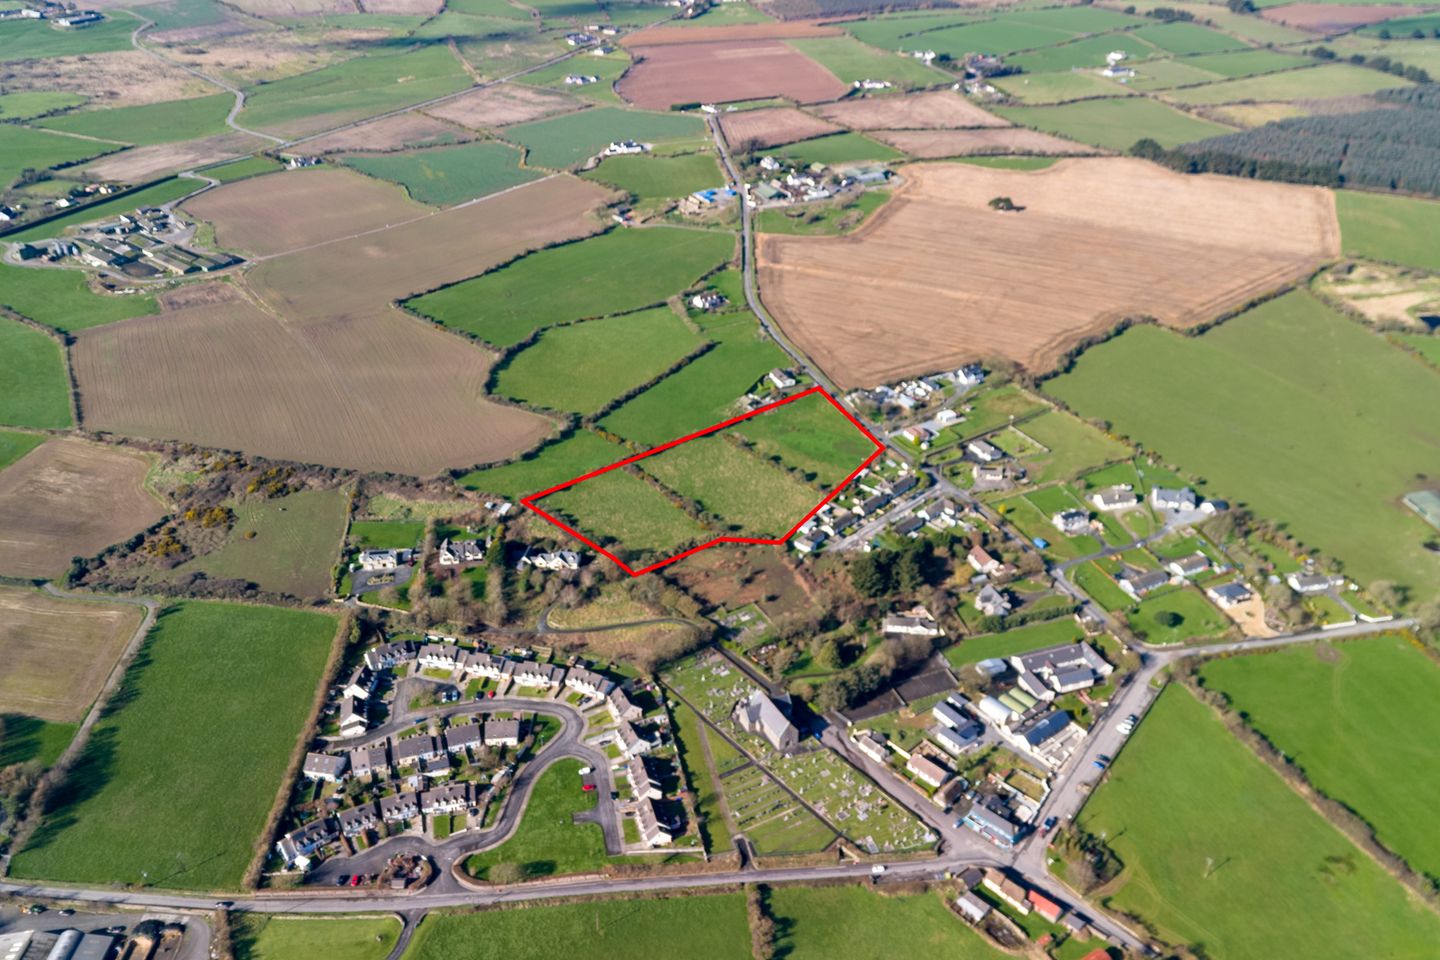 Development Site at Ballinageeragh, Dunhill, Co. Waterford